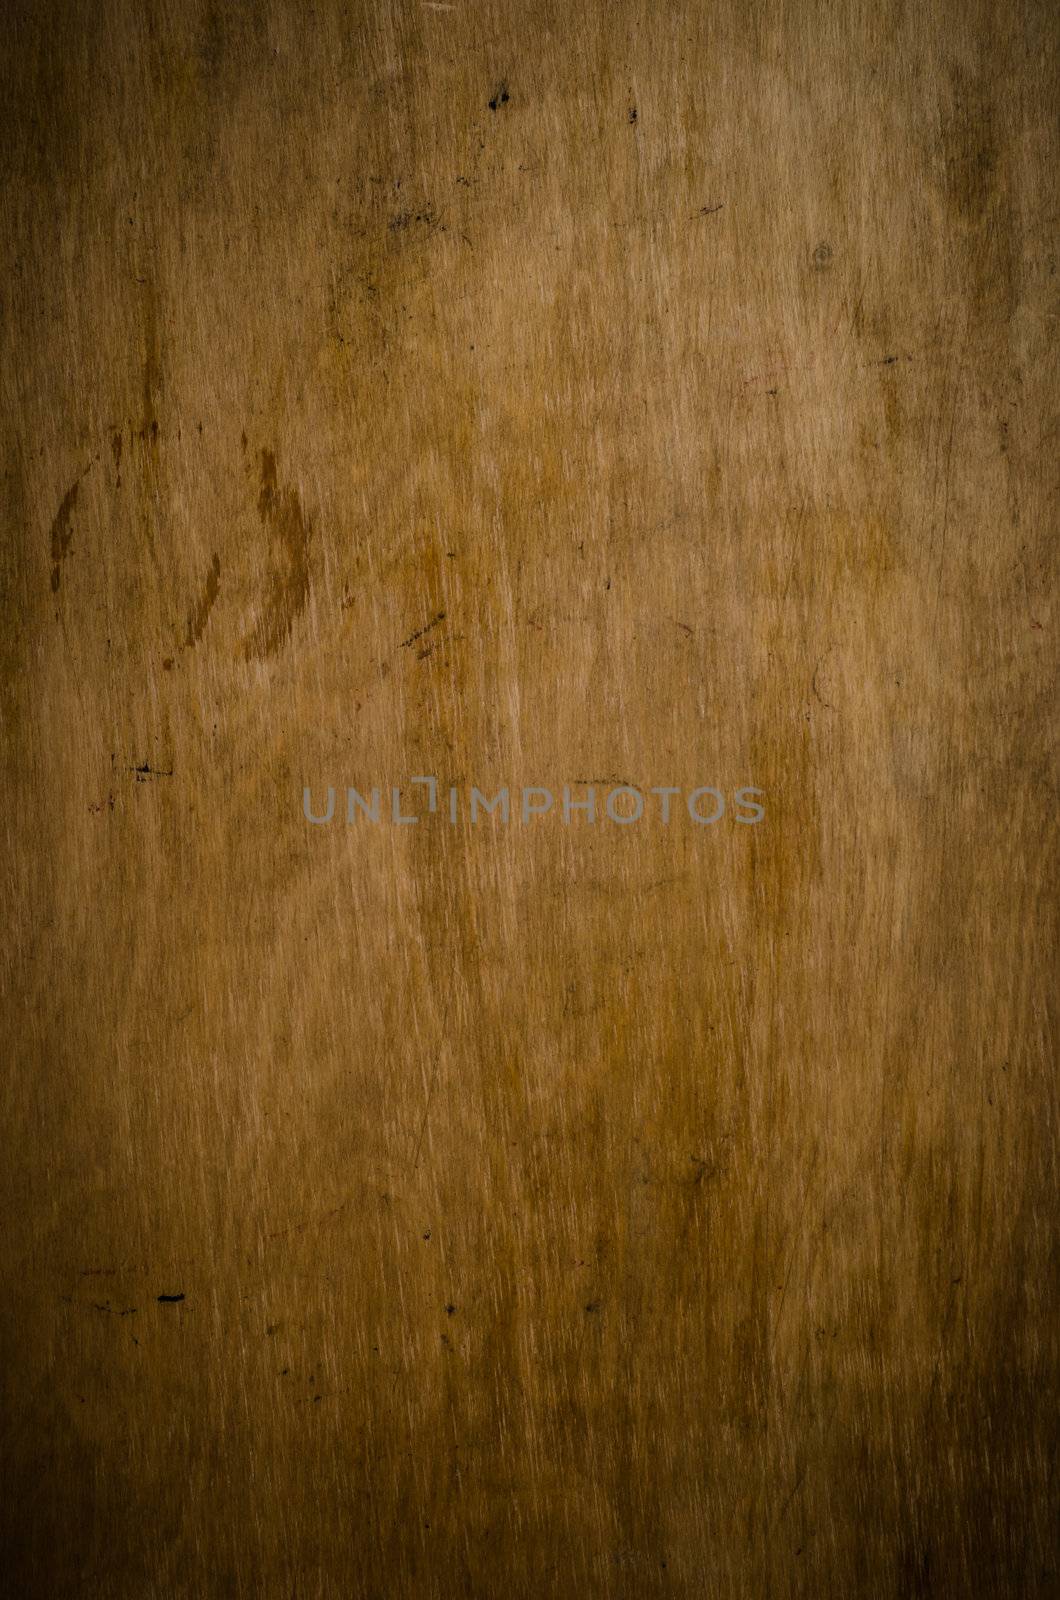 An old dark wood panel with stains, scratches and vignette provides a grunge style background. 